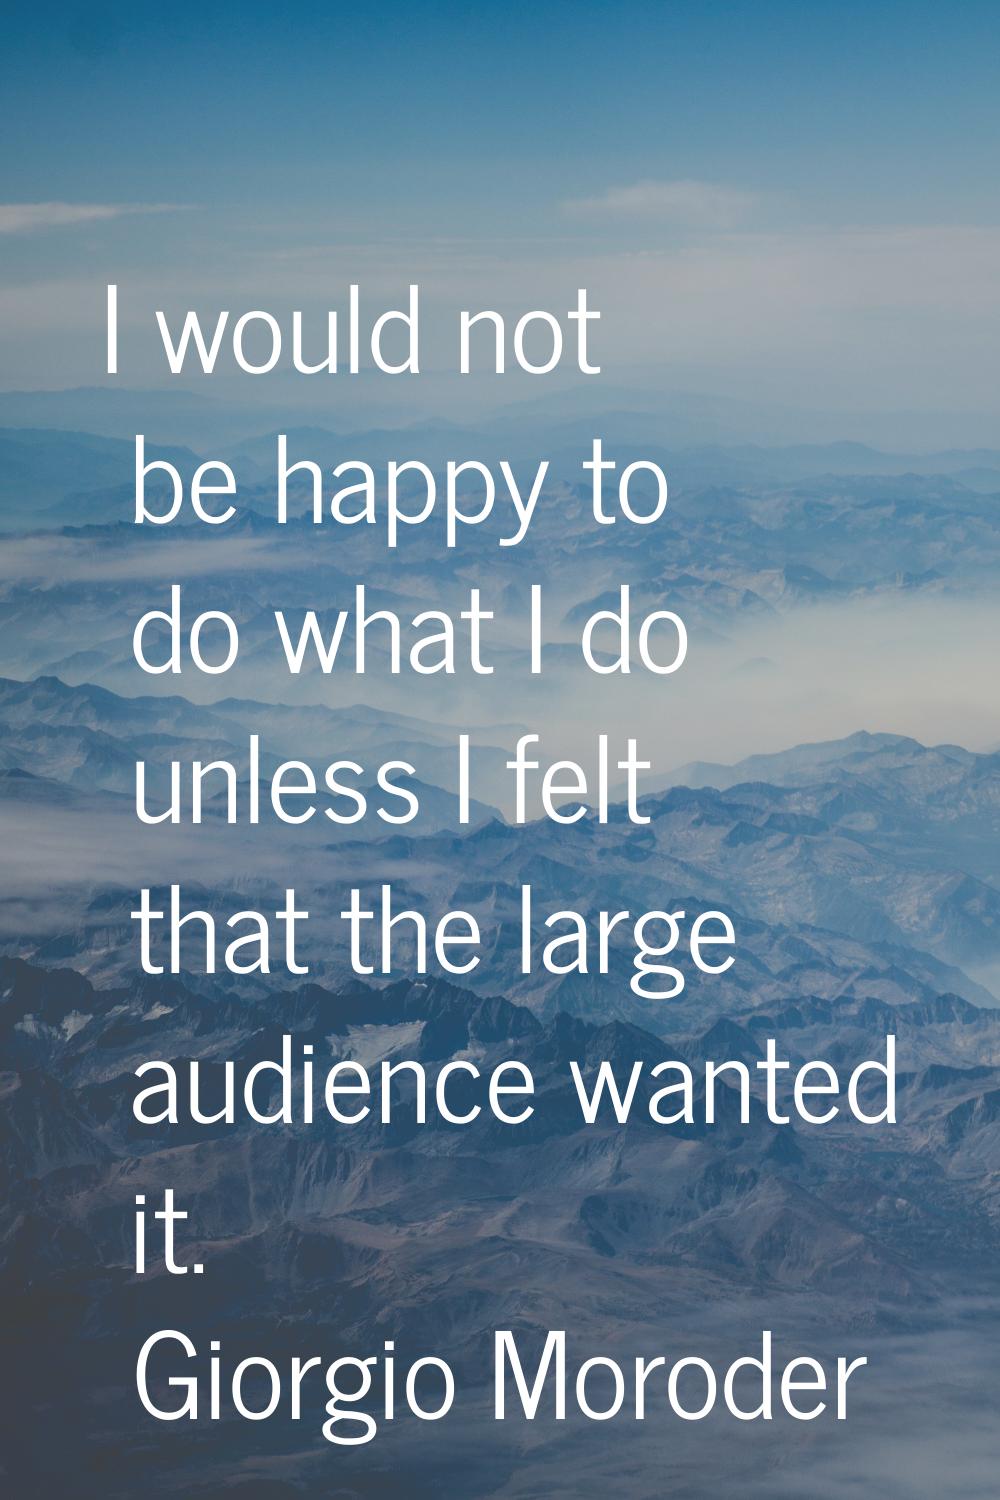 I would not be happy to do what I do unless I felt that the large audience wanted it.